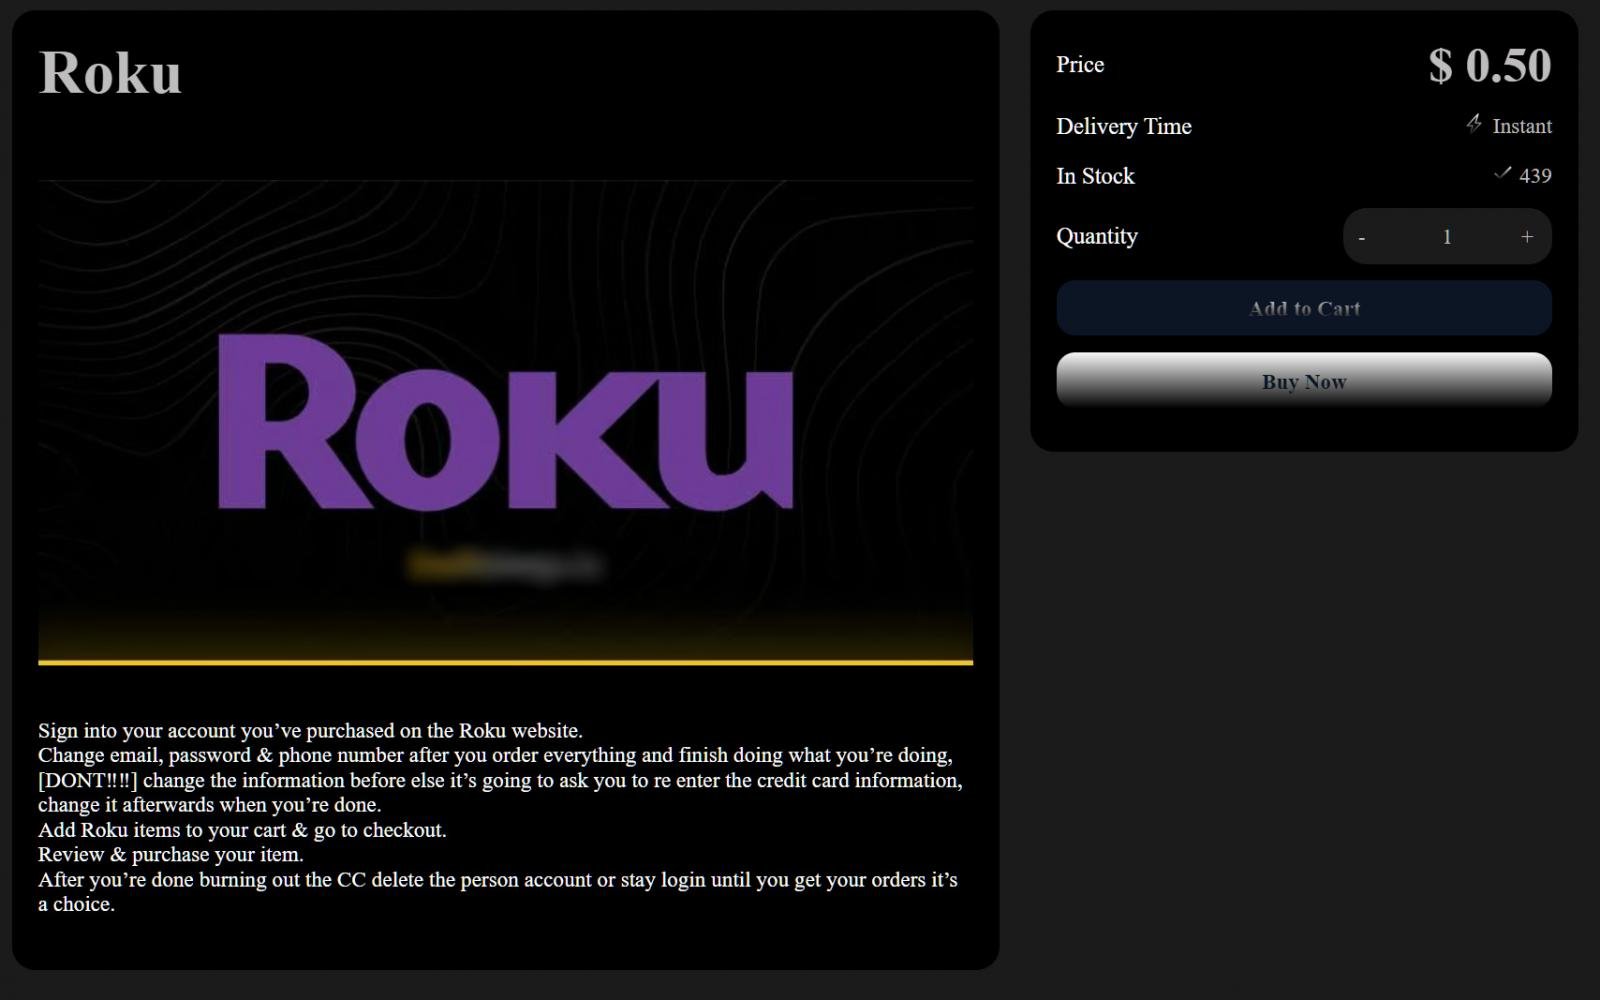 Stolen Roku accounts sold for as little as $0.50 on a marketplace